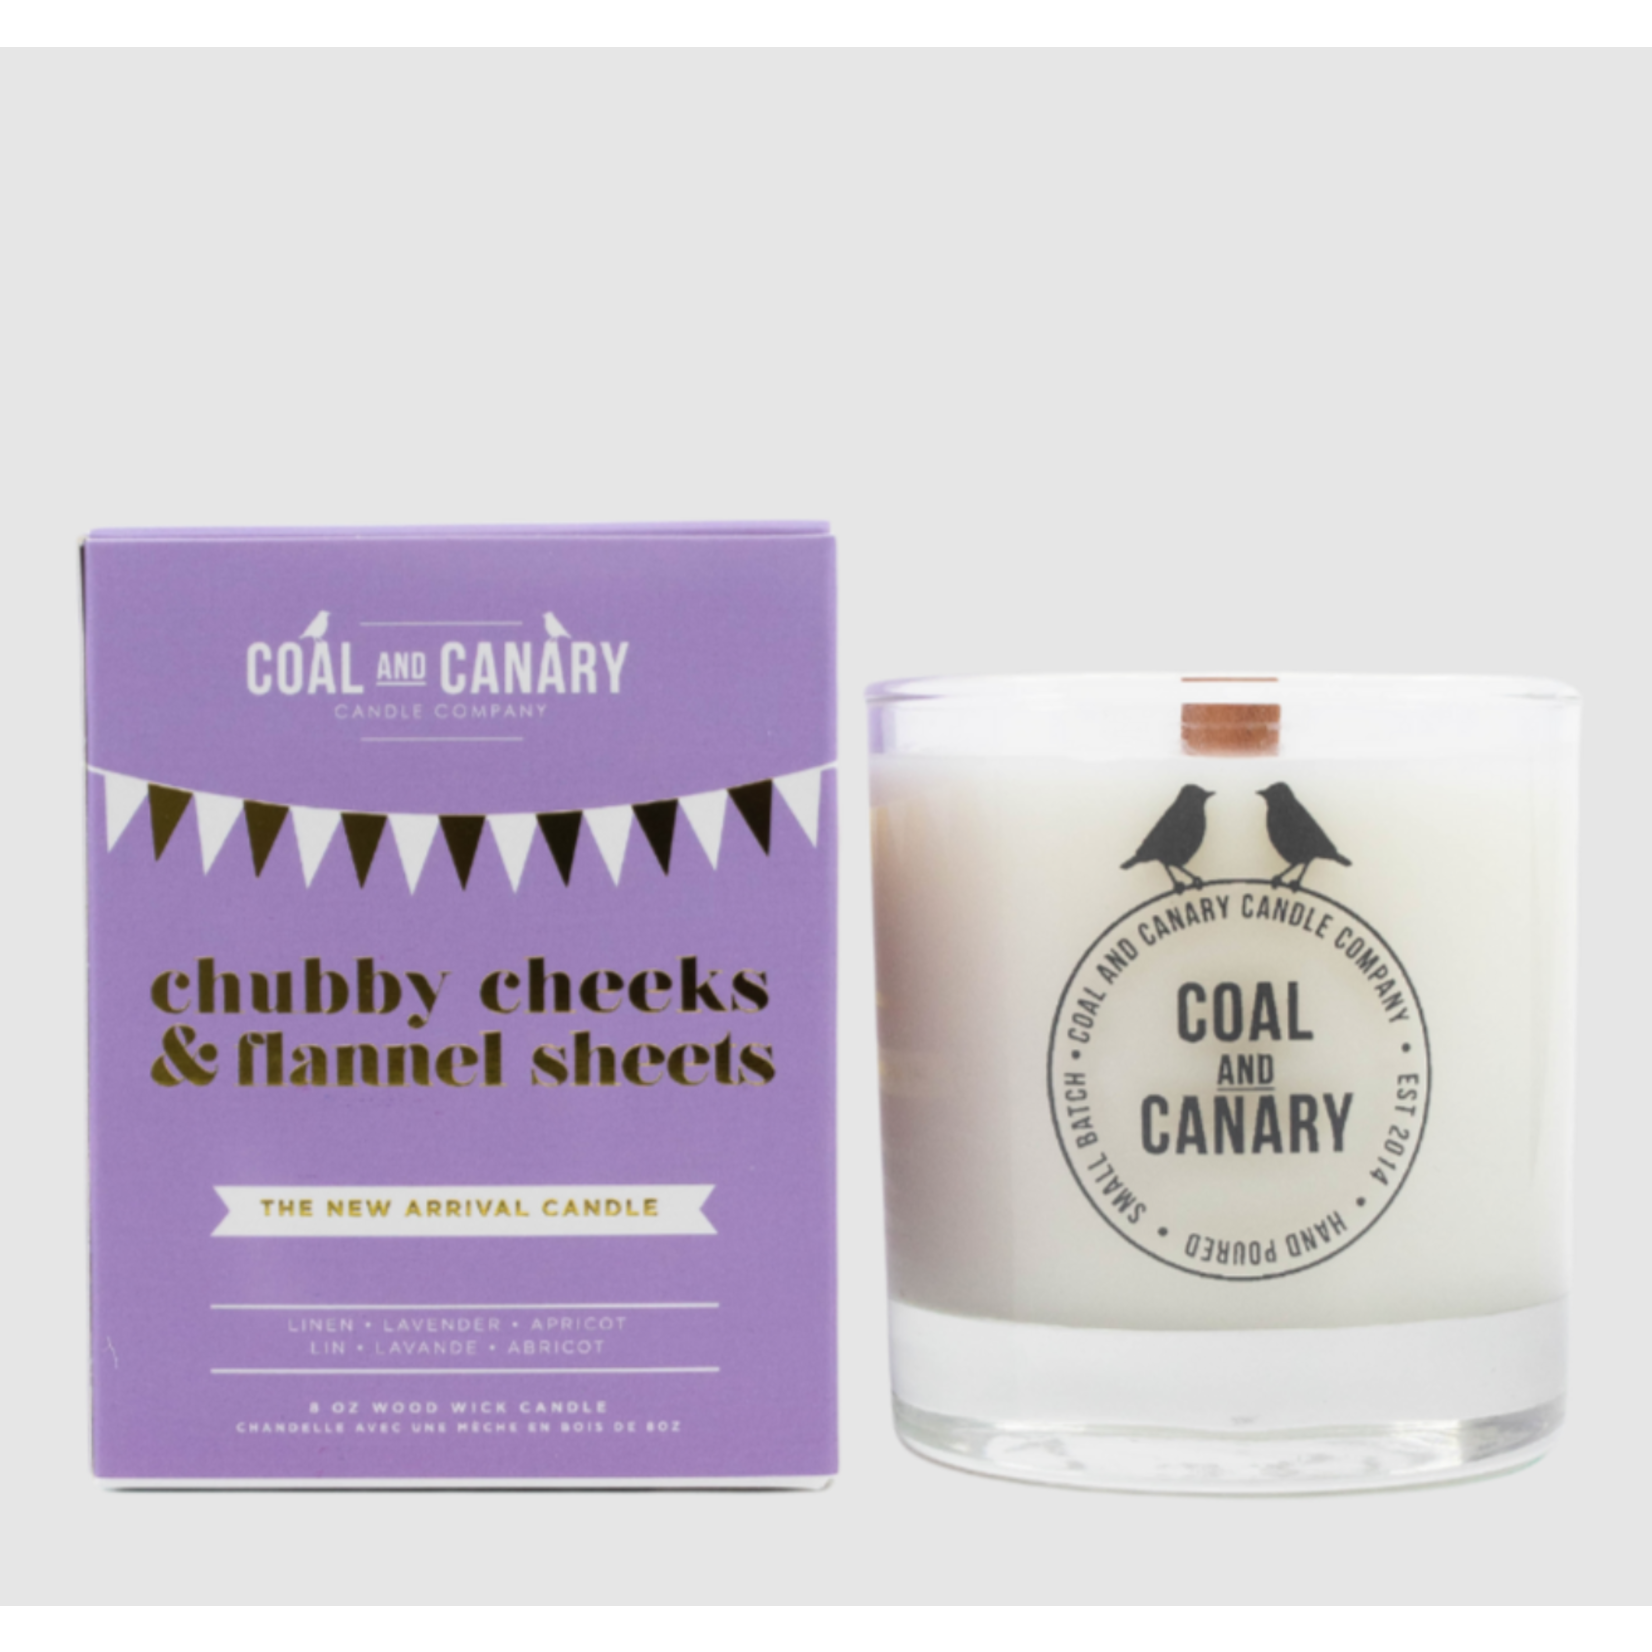 Coal and Canary Chubby Cheeks & Flannel Sheets